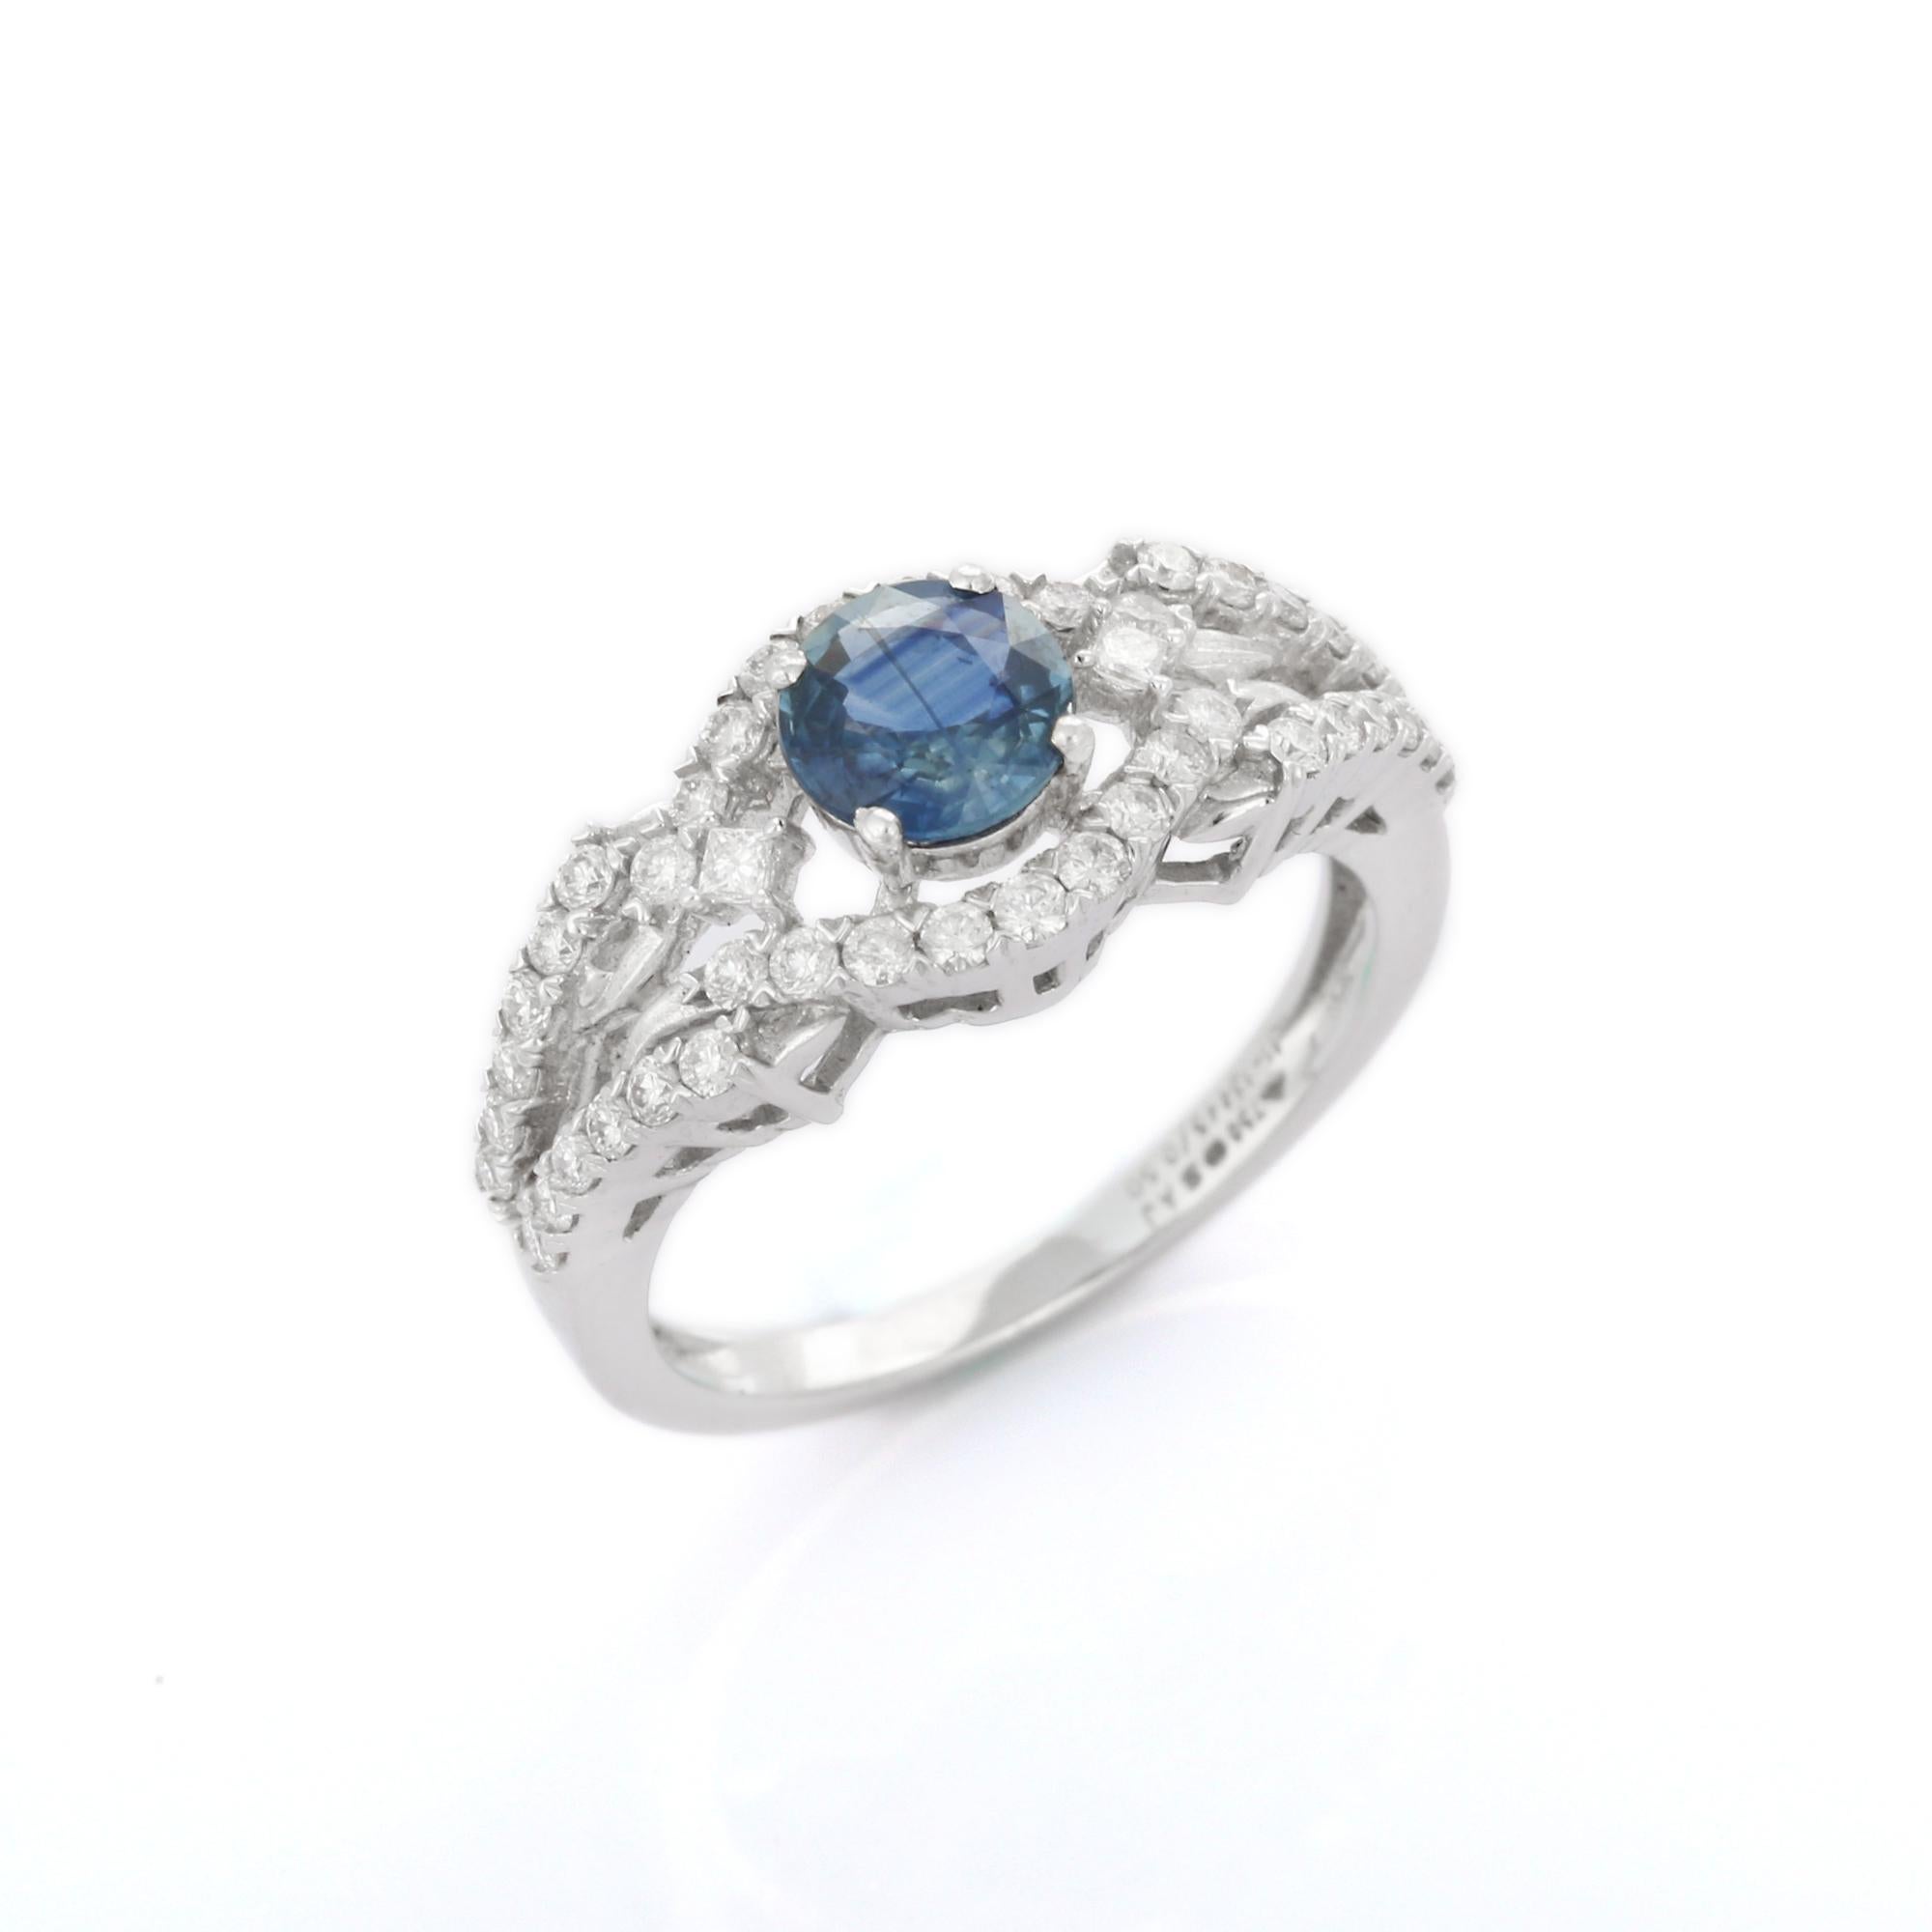 For Sale:  18K White Gold Regal 0.88ct Round Cut Sapphire Diamond Engagement Ring  2